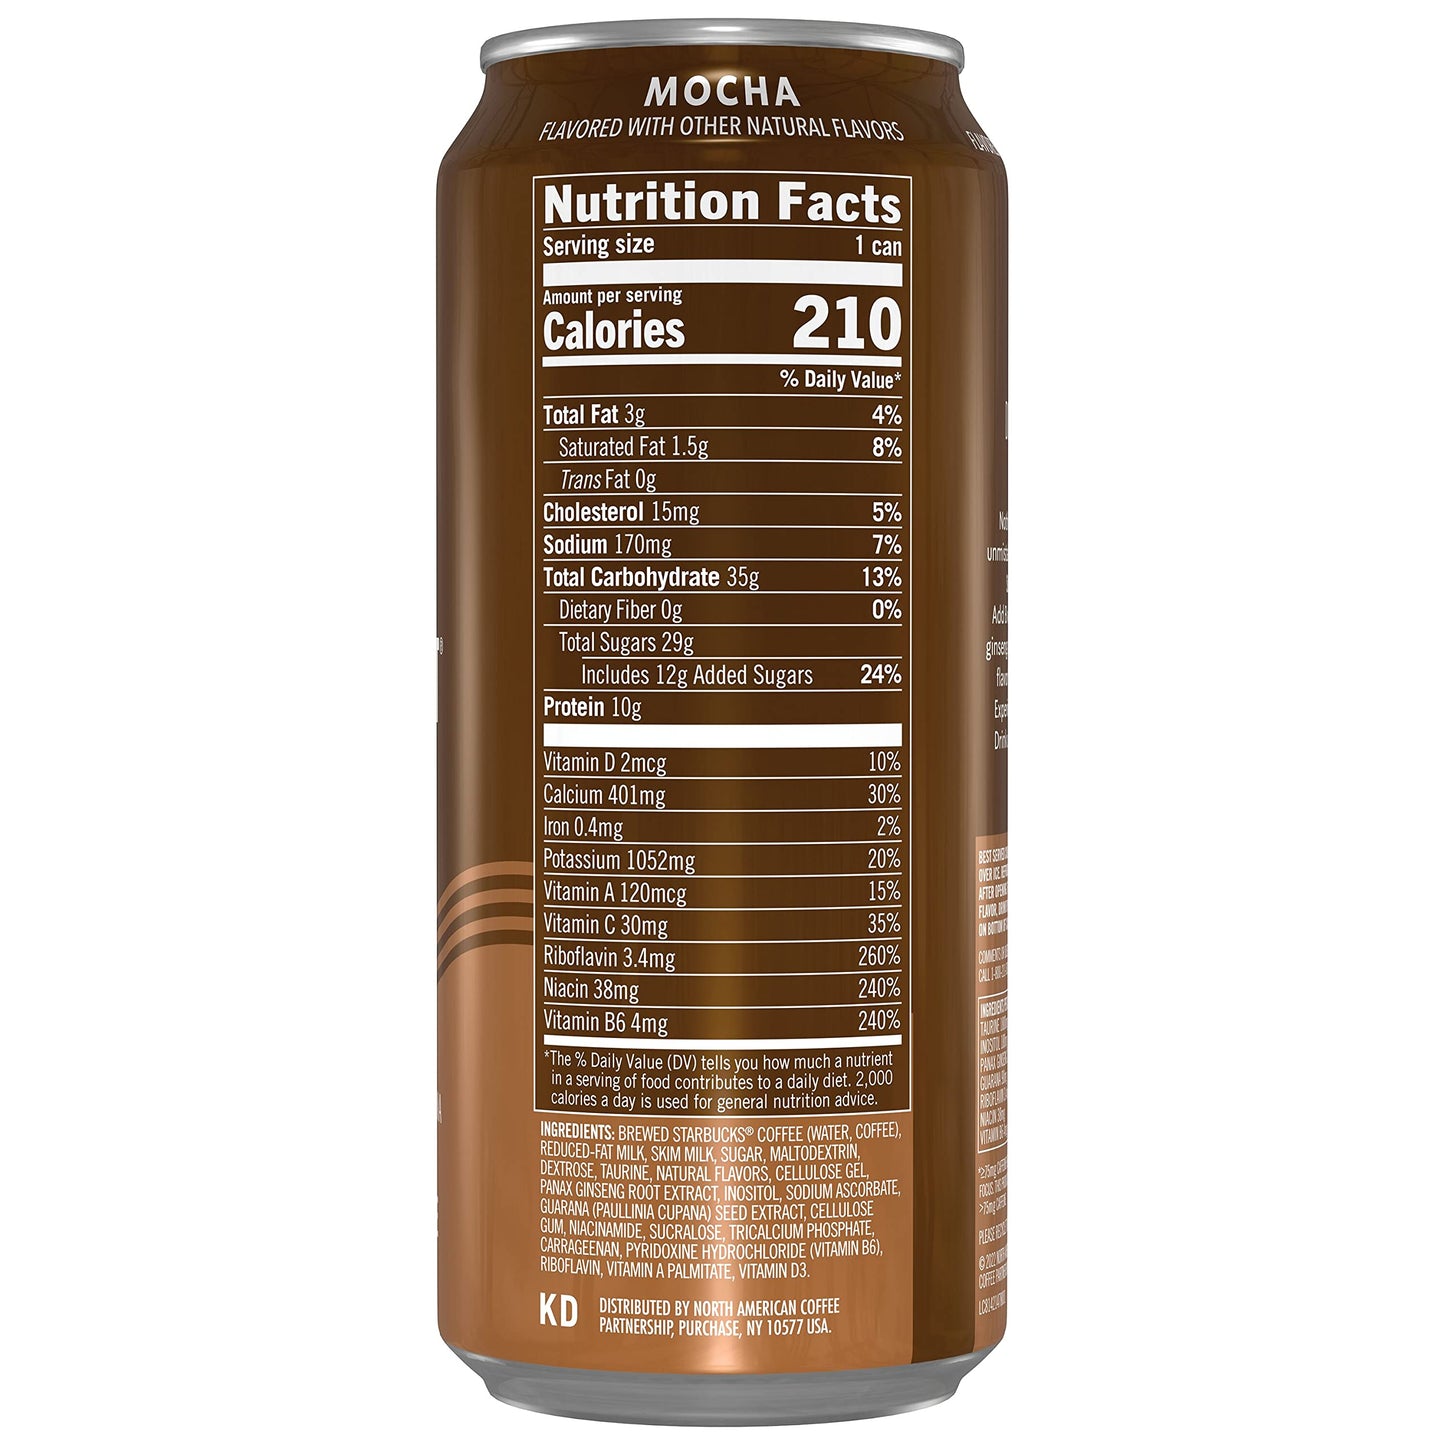 Starbucks Doubleshot Energy Espresso Coffee, Mocha, 15 oz Cans (12 Pack) (Packaging May Vary)